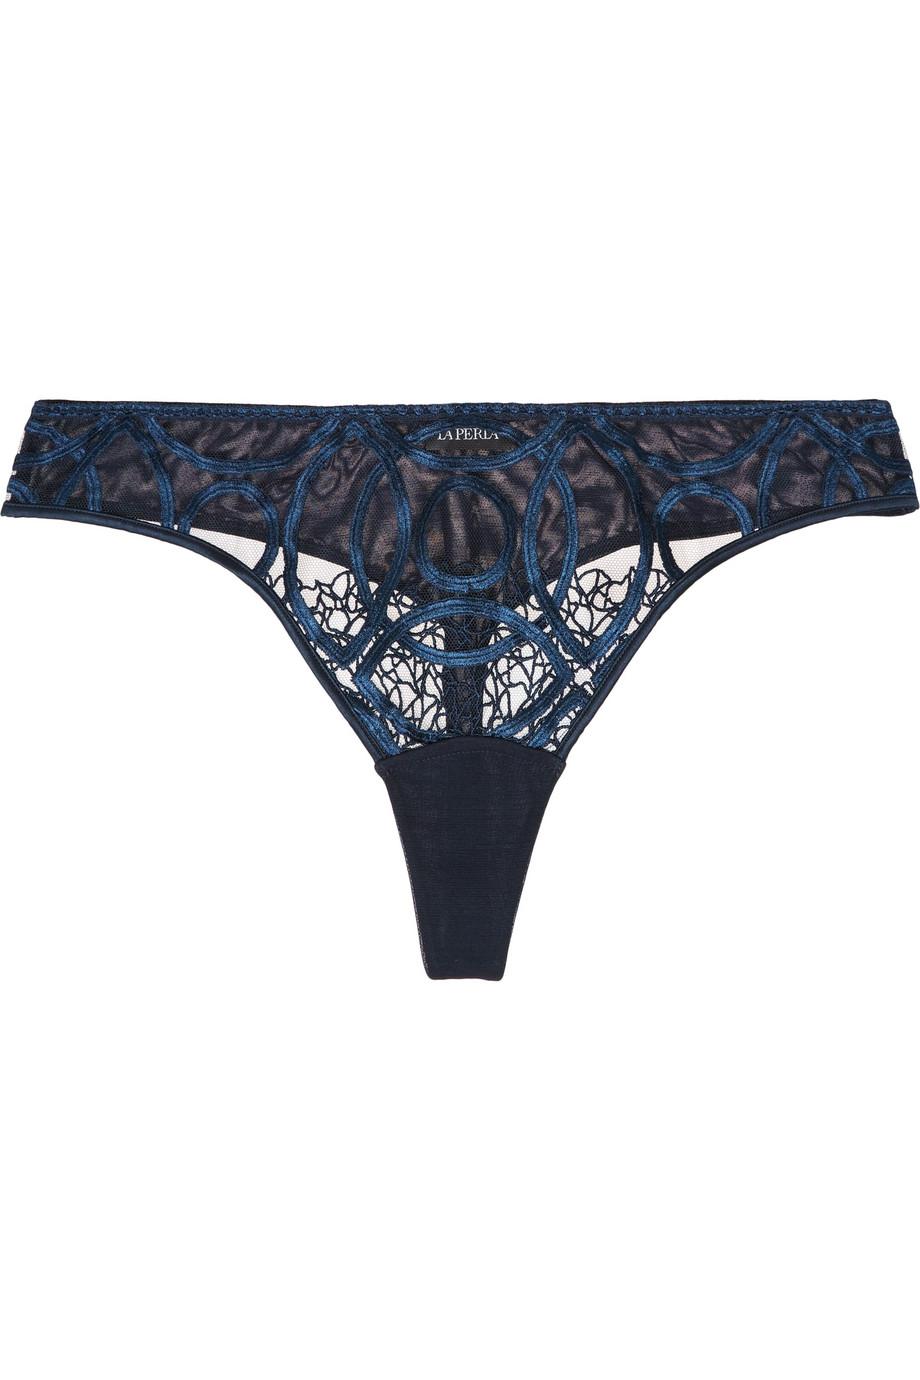 La Perla Circles Low-rise Embroidered Stretch-tulle Thong | ModeSens